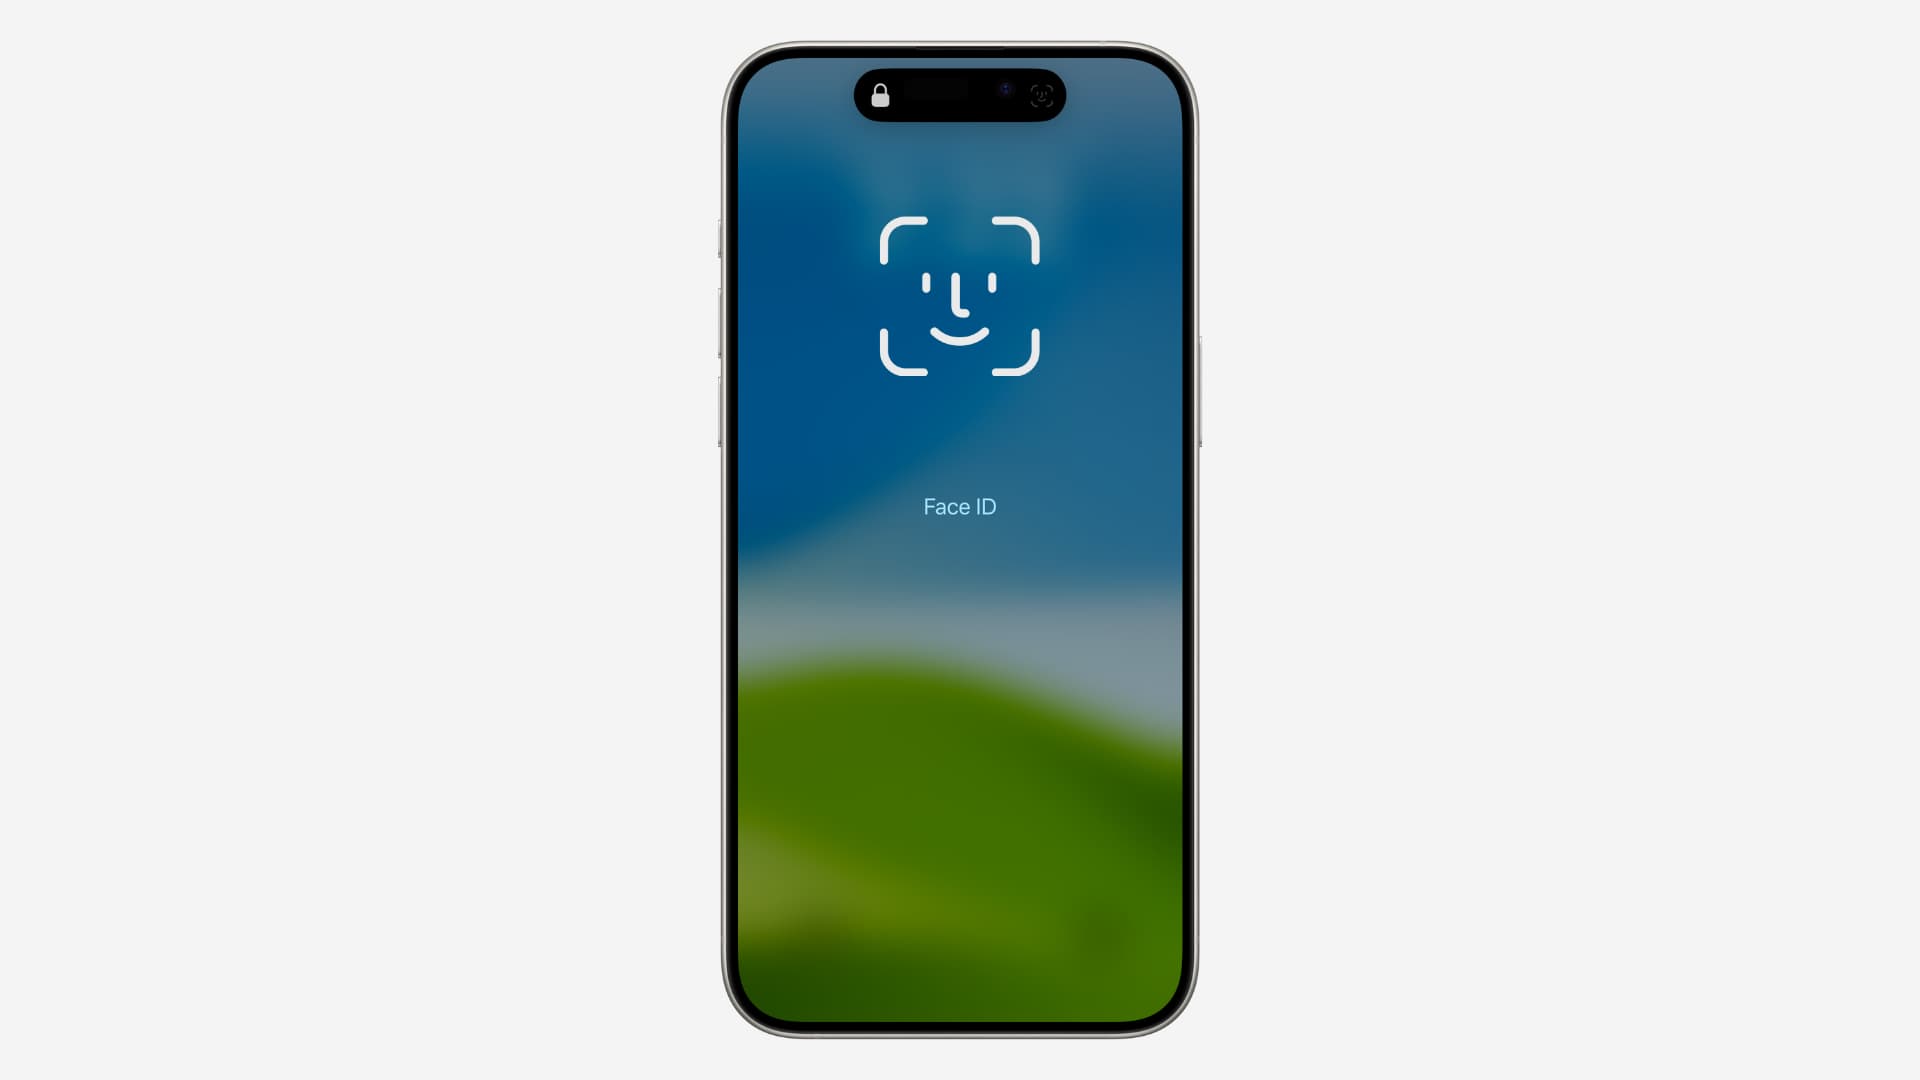 iPhone Lock Screen showing Face ID